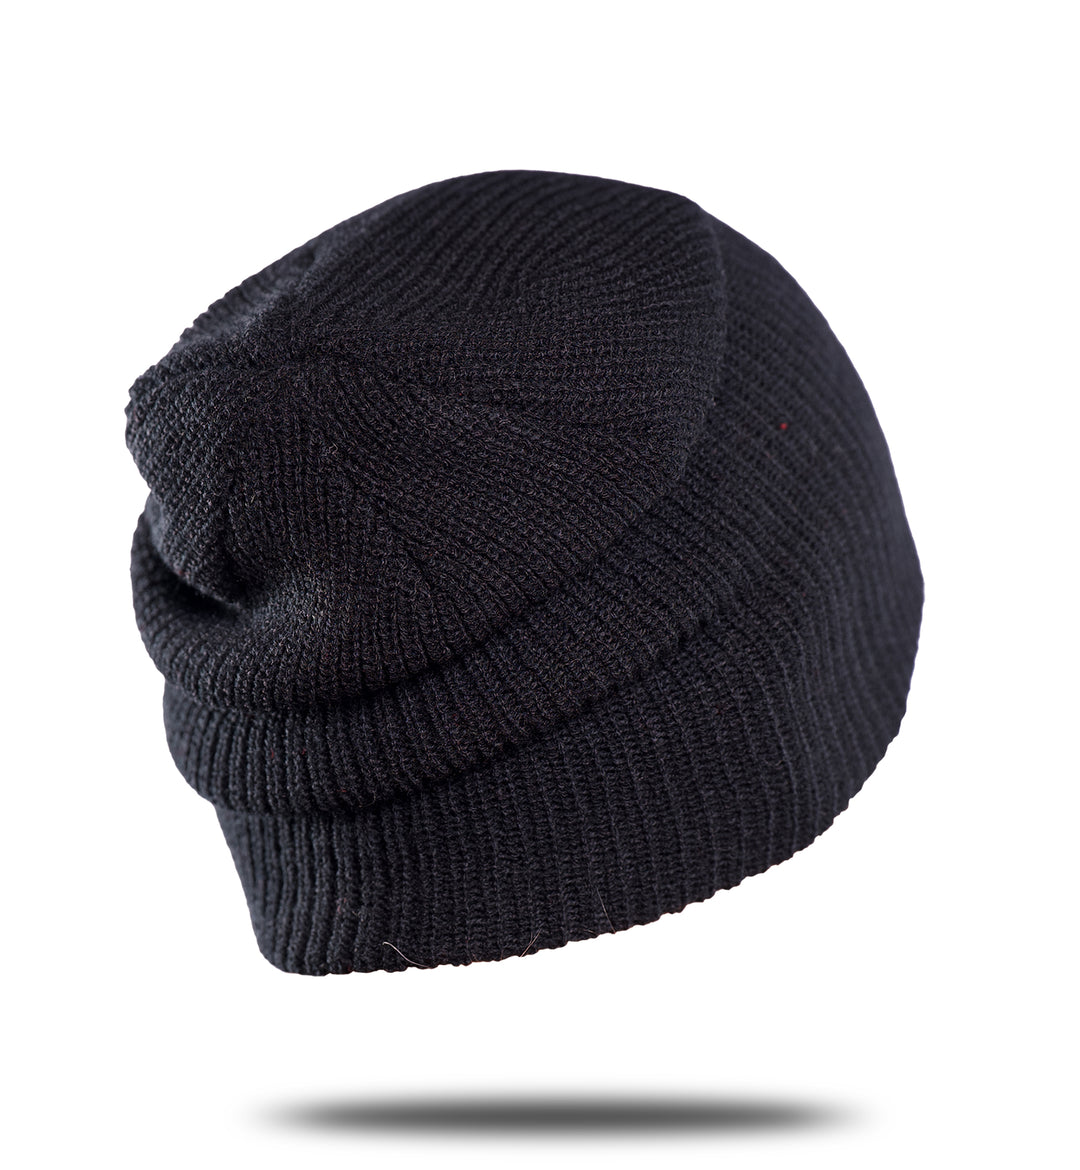 Patched Gym Beanie (Black)